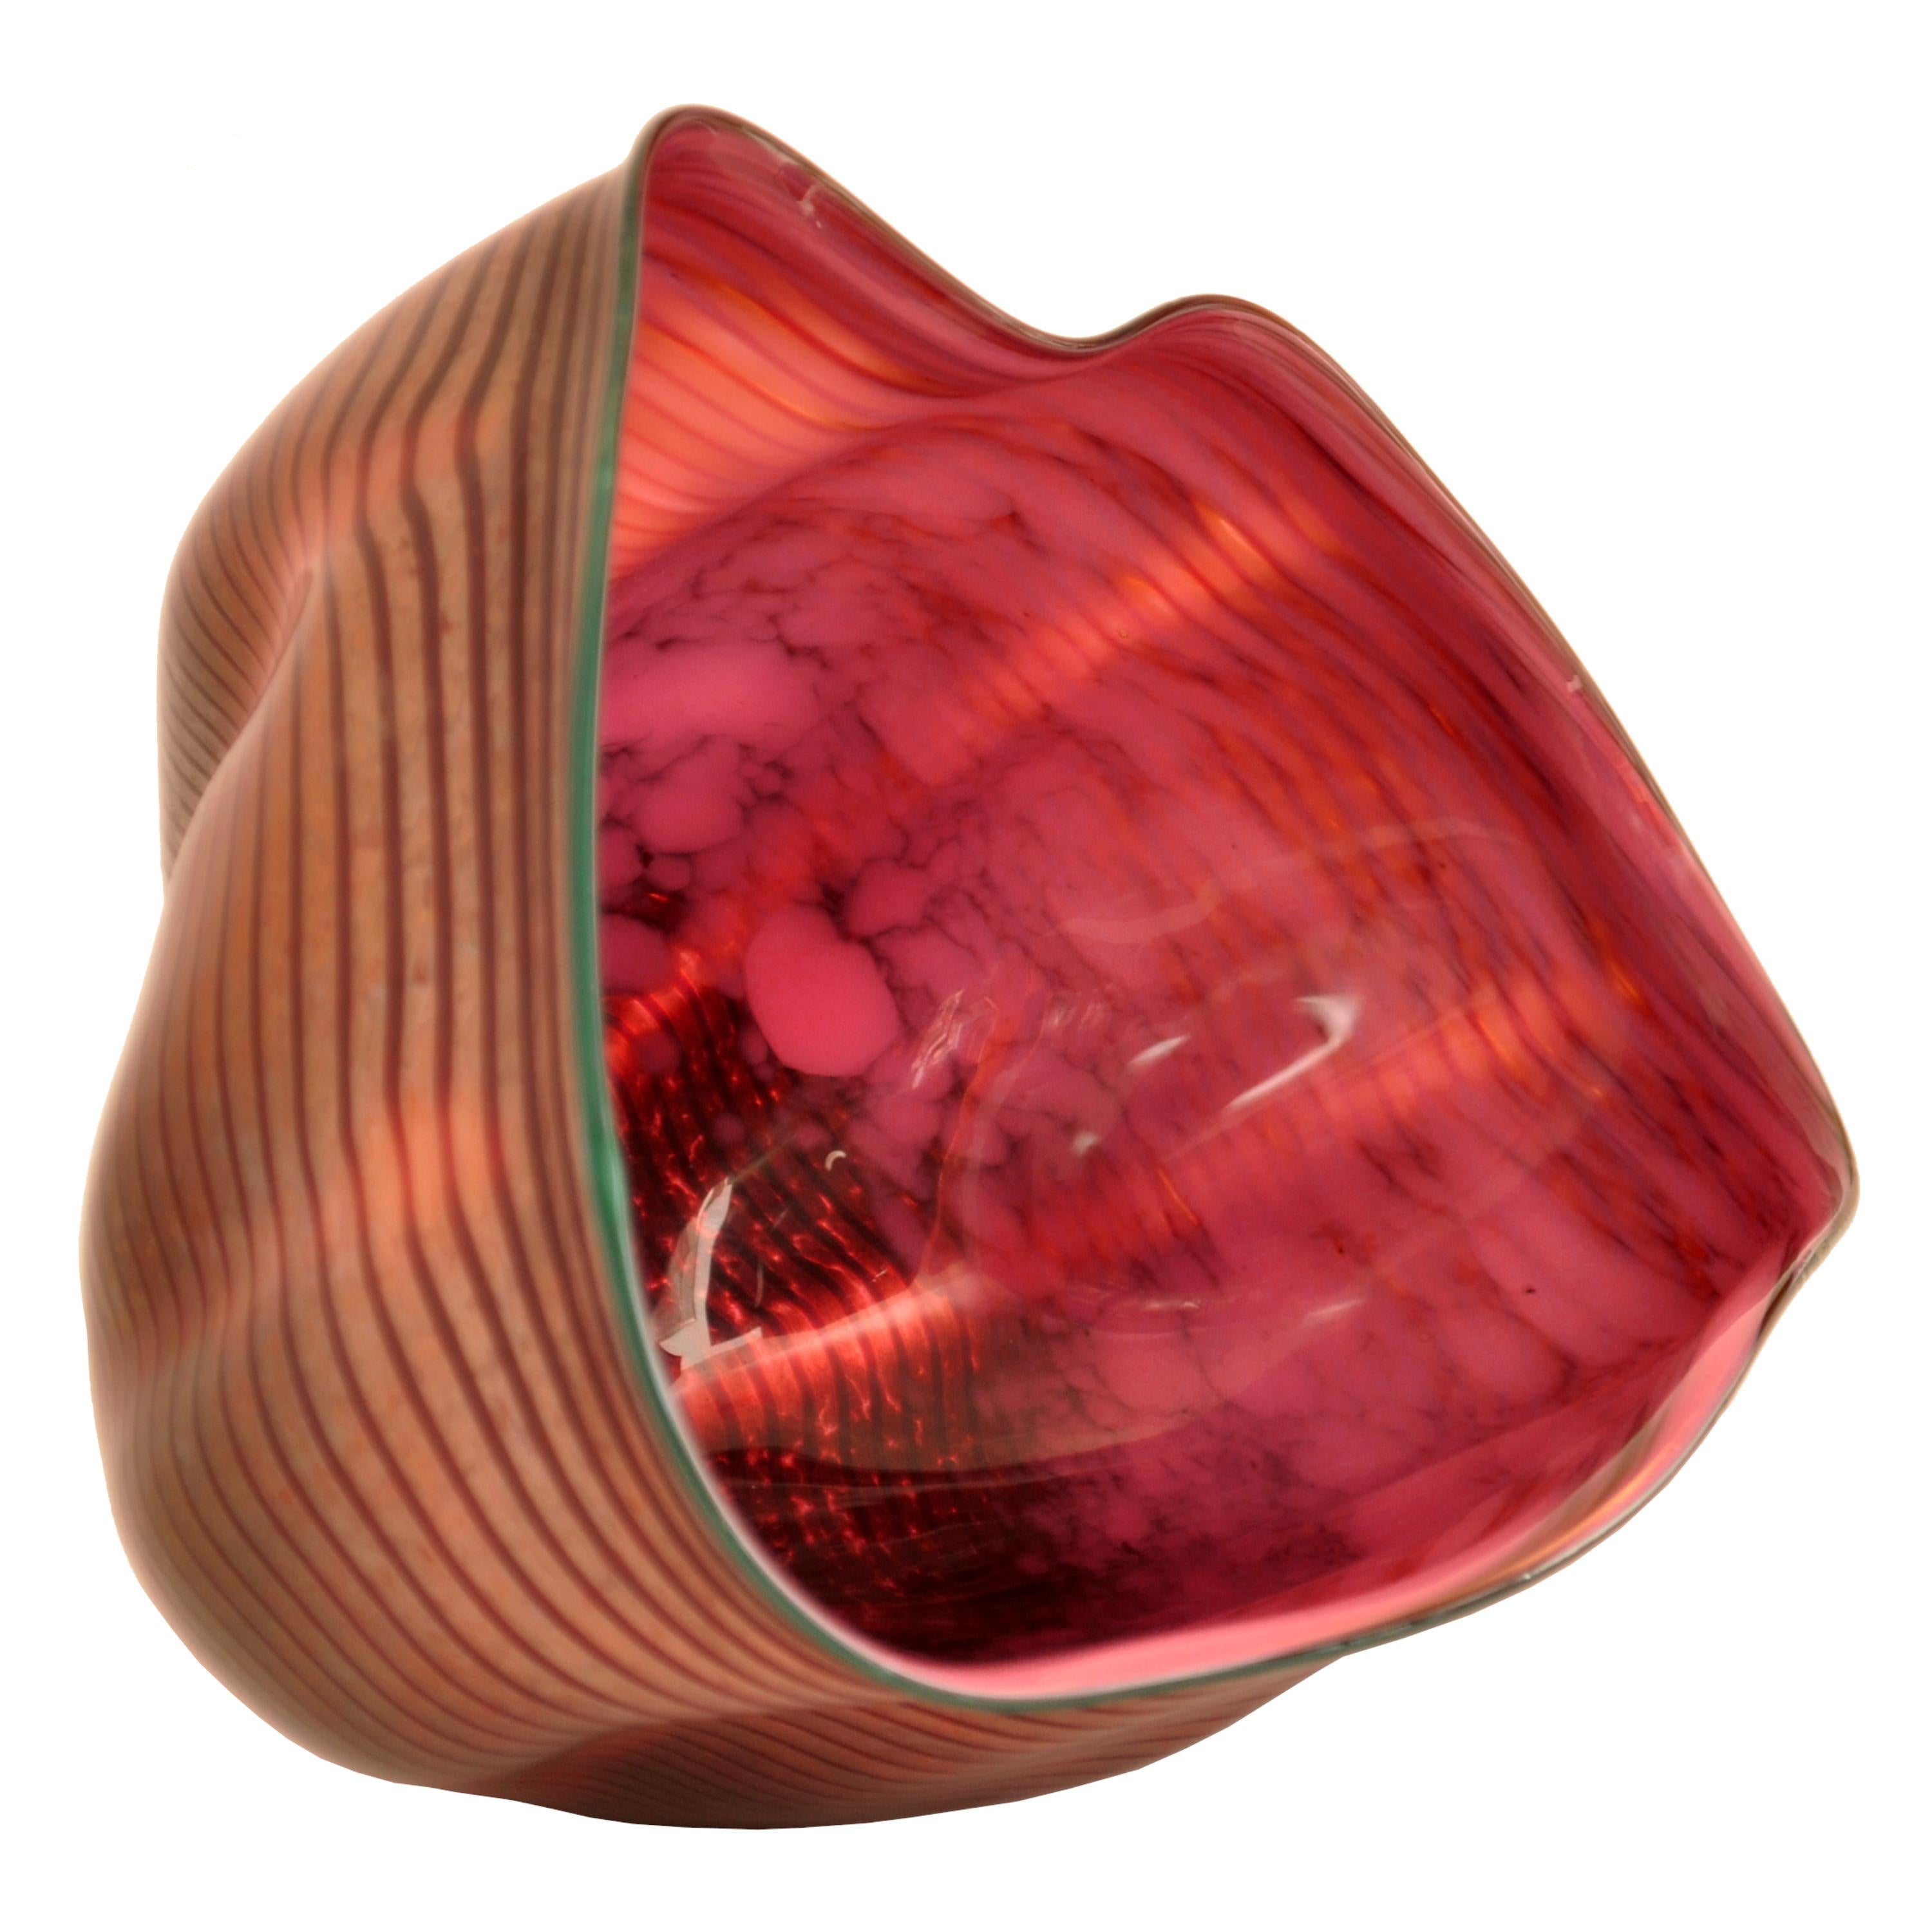 An early, rare and original Dale Chihuly Macchia glass form vessel, signed and dated 1985.
The vessel is beautifully and organically formed of red and mottled gold iridescent stripes, the mouth of the vessel have a green lip.
Condition is